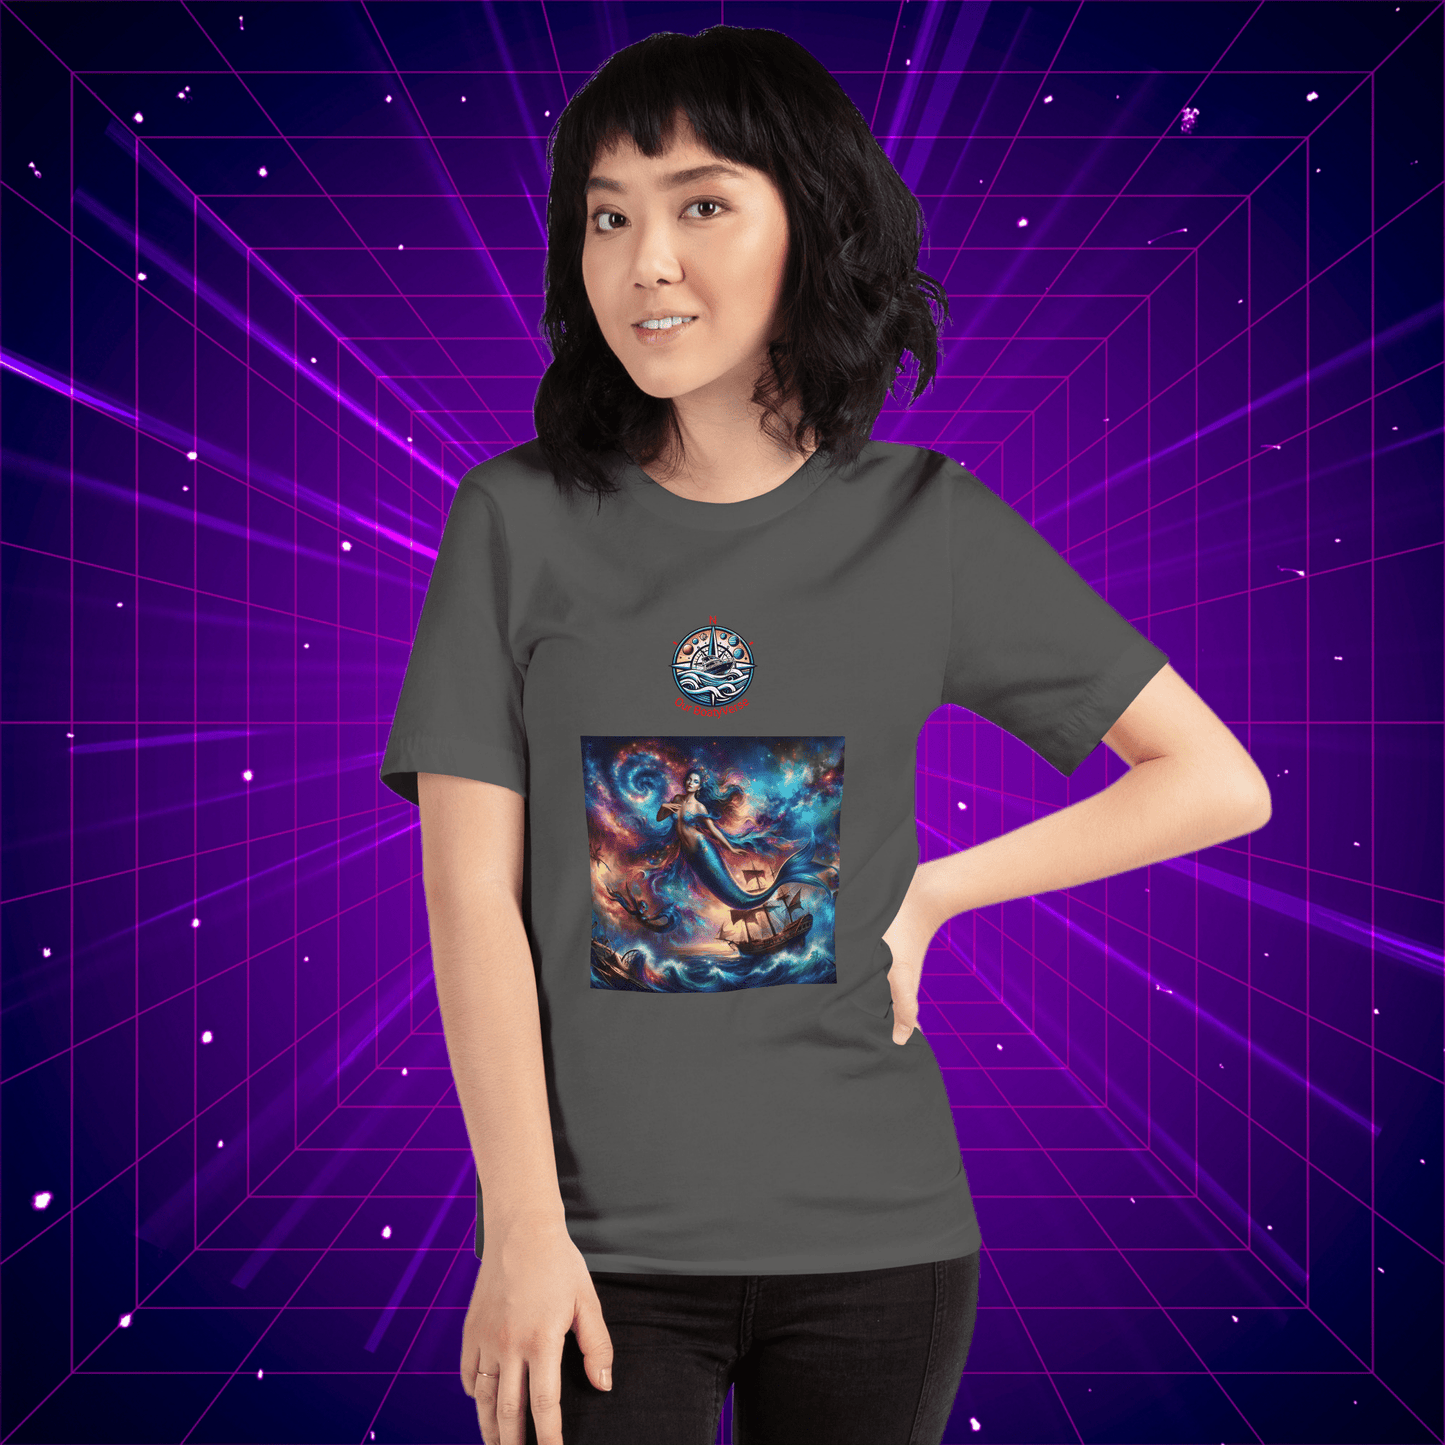 Mermaid of the Vortex T-shirt by Our BoatyVerse